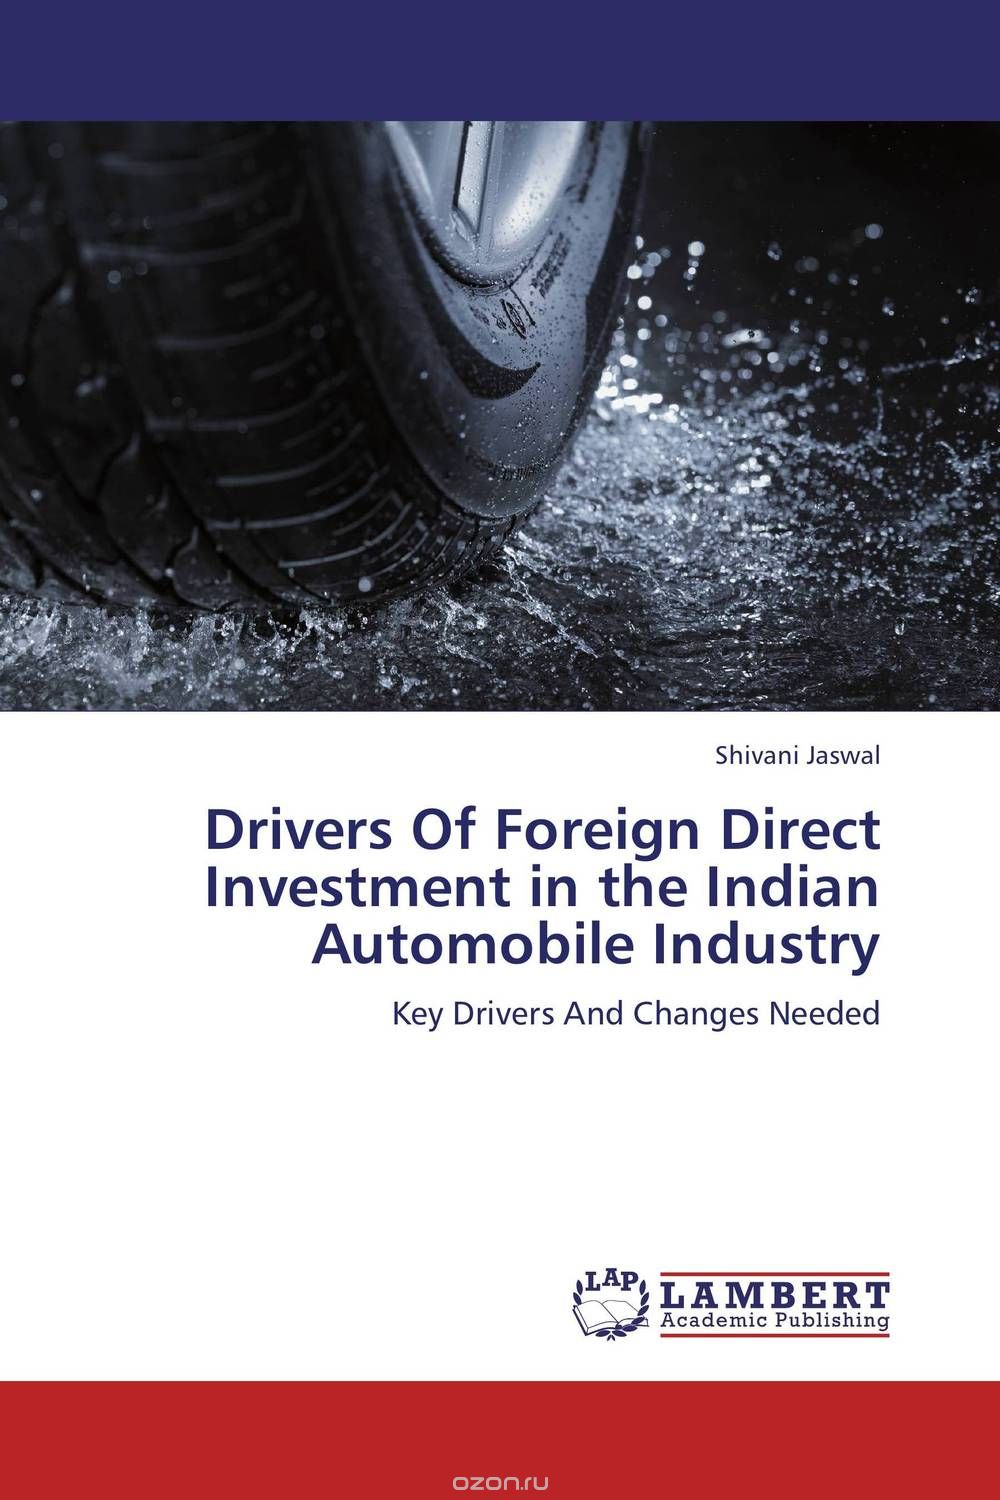 Drivers Of Foreign Direct Investment in the Indian Automobile Industry